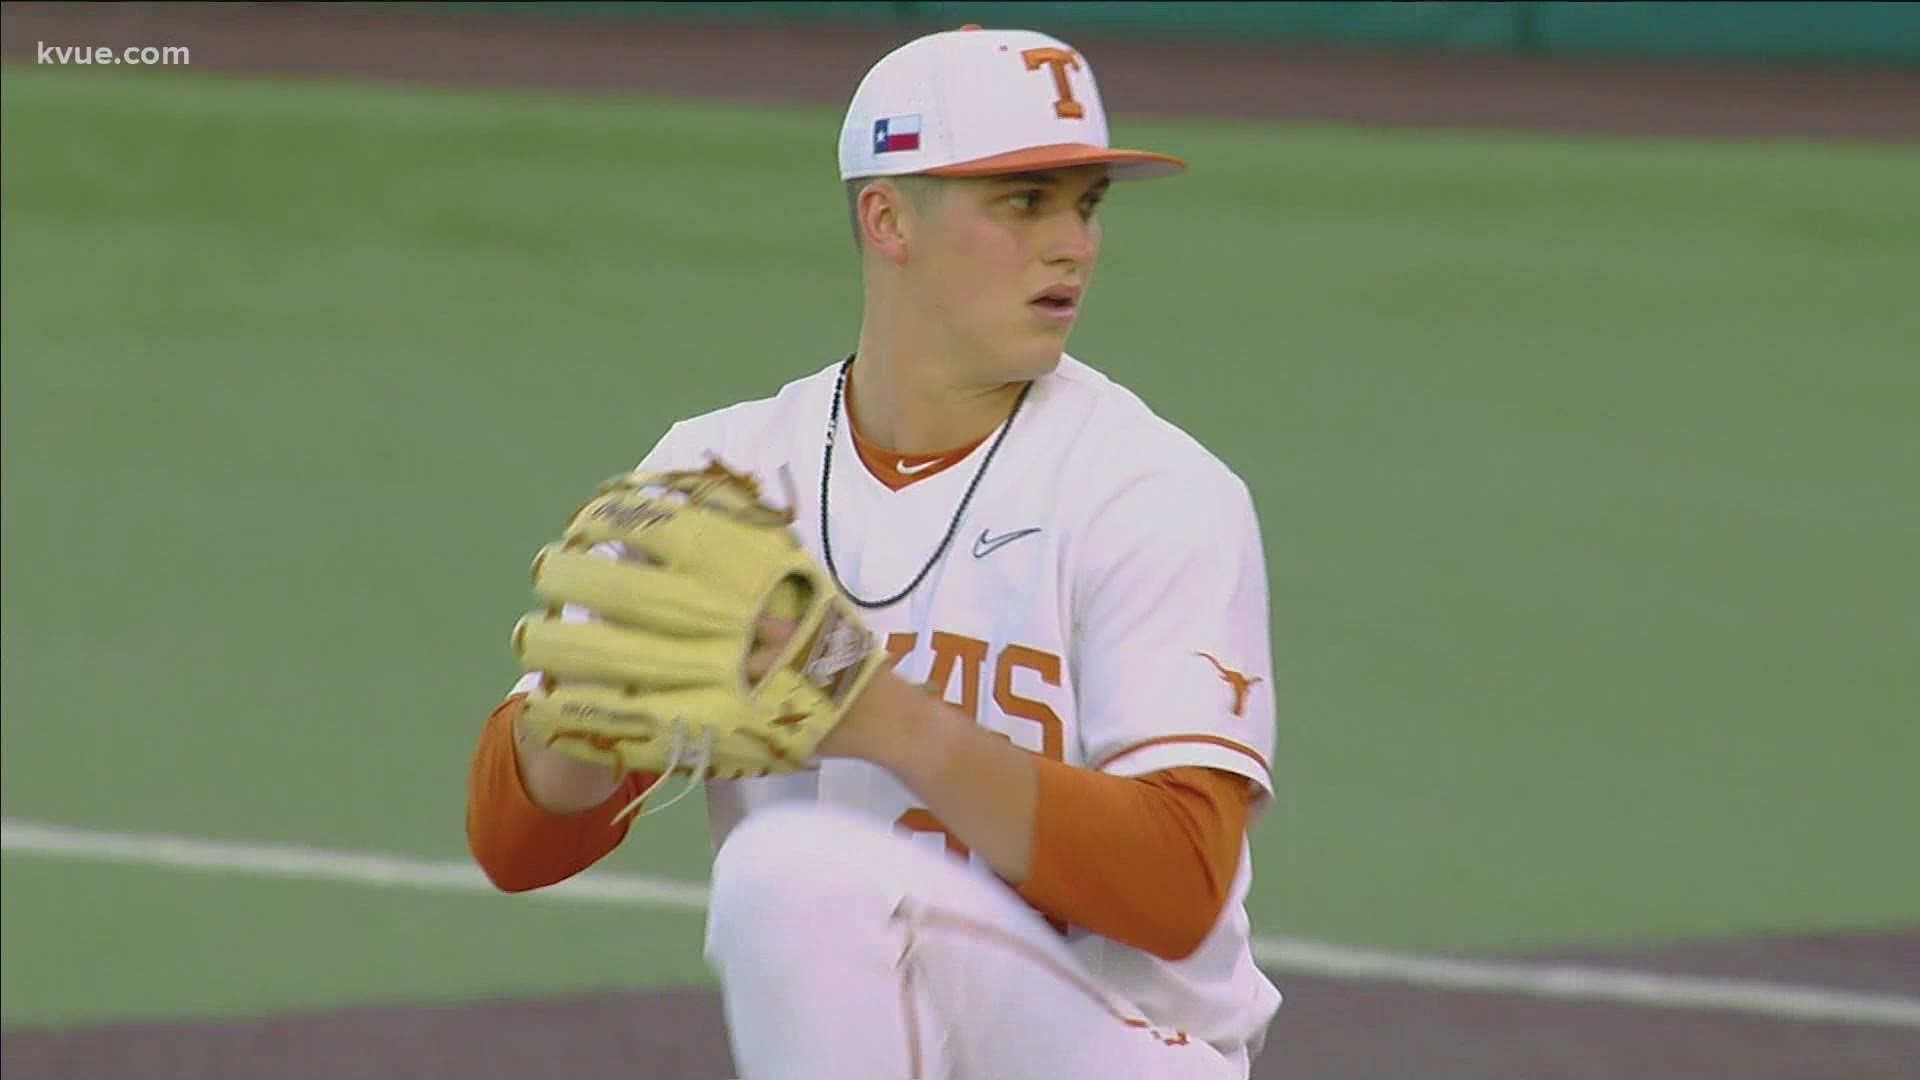 Texas Longhorns right-handed pitcher Ty Madden was selected with the 32nd overall pick by the Detroit Tigers in the 2021 Major League Baseball Draft.